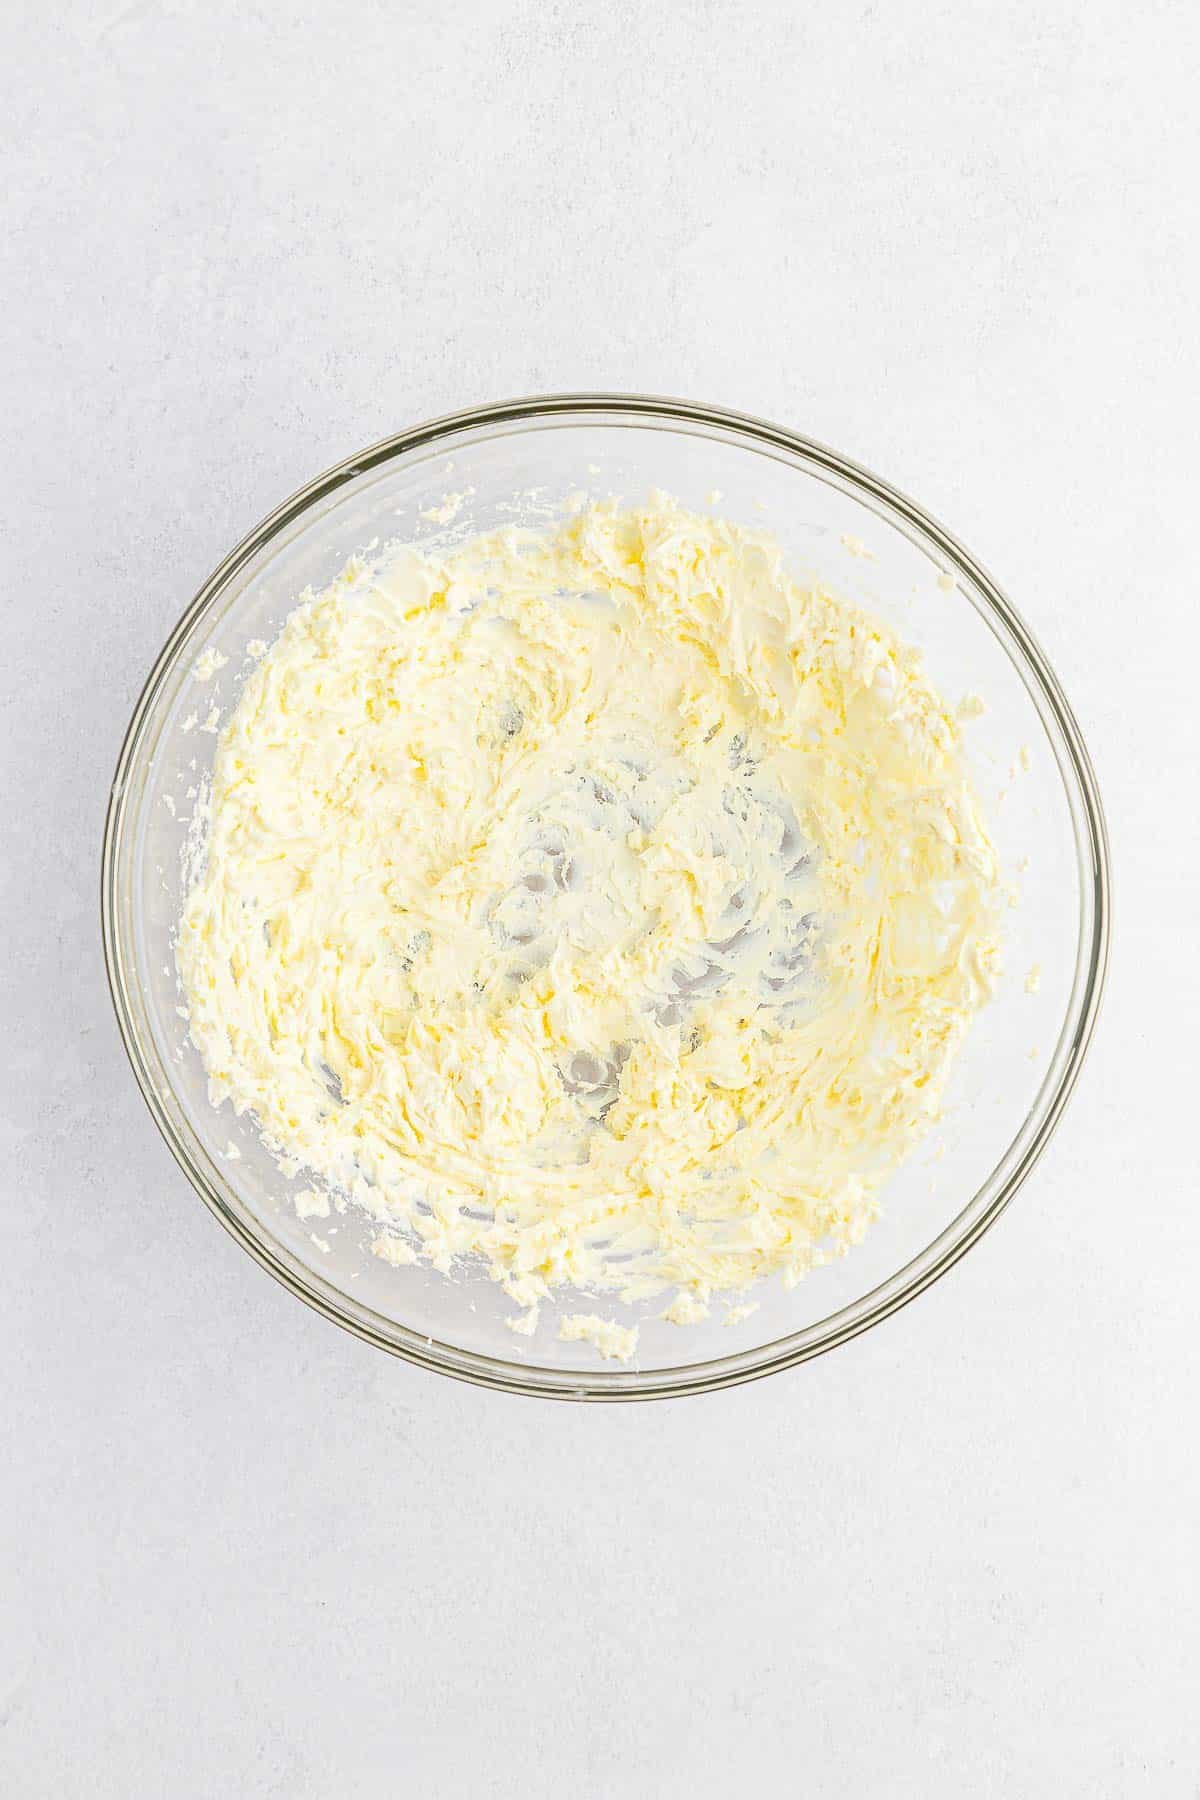 Cream cheese creamed in a glass mixing bowl.